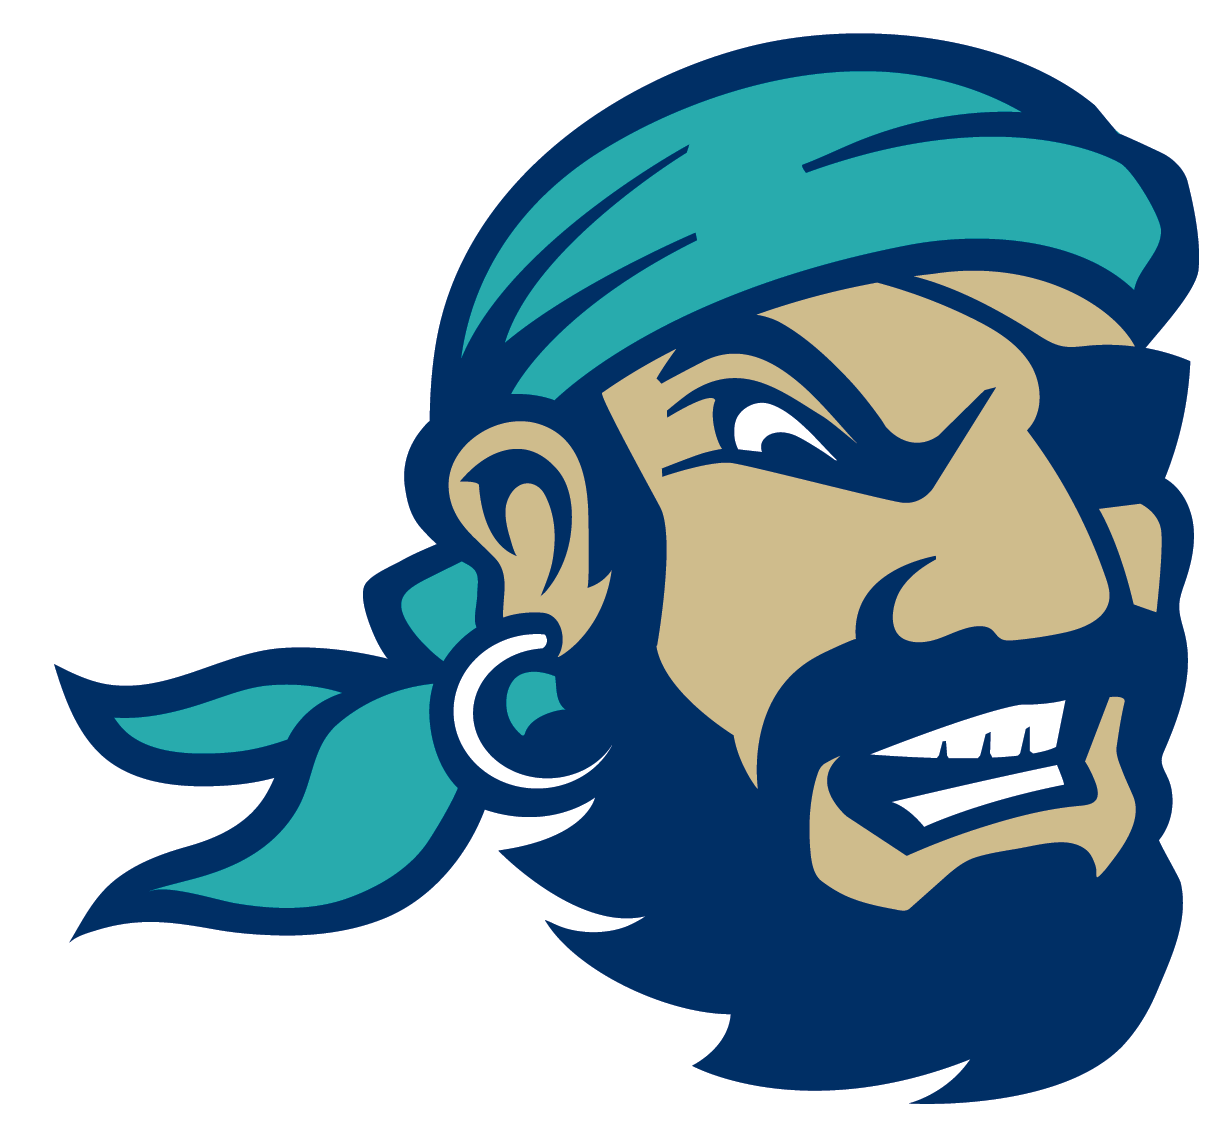 Find This Pin And More On Sports Logos Design By Gcj206 - Massachusetts Pirates (1271x1159)